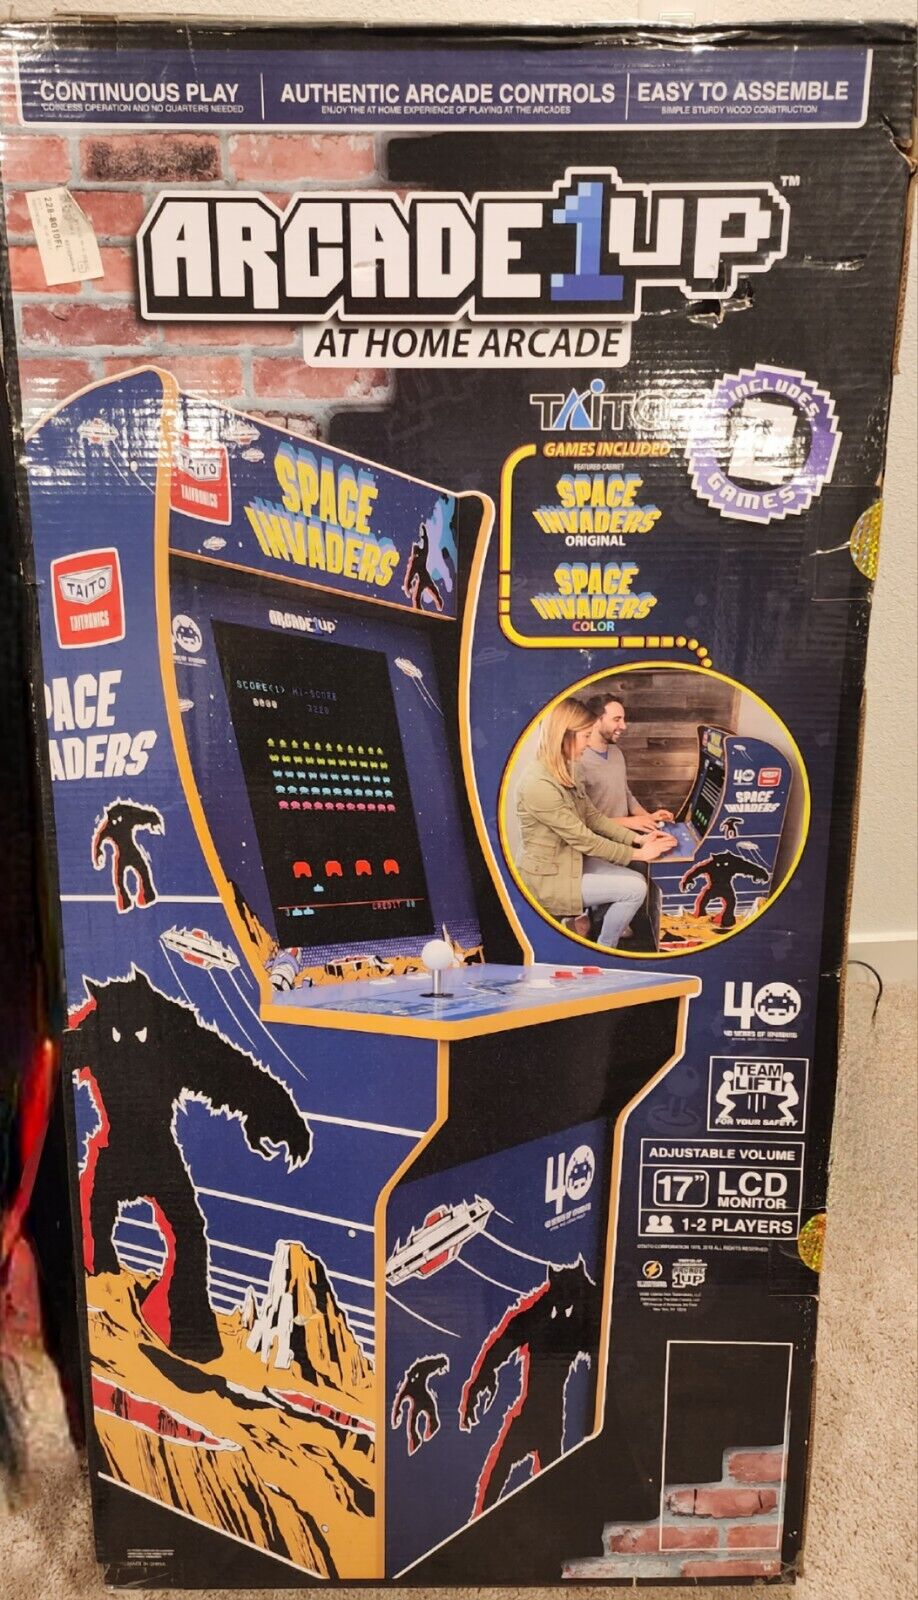 RARE Arcade1Up Space Invaders Arcade Machine NEW IN BOX - SEALED BATTLEFRONT